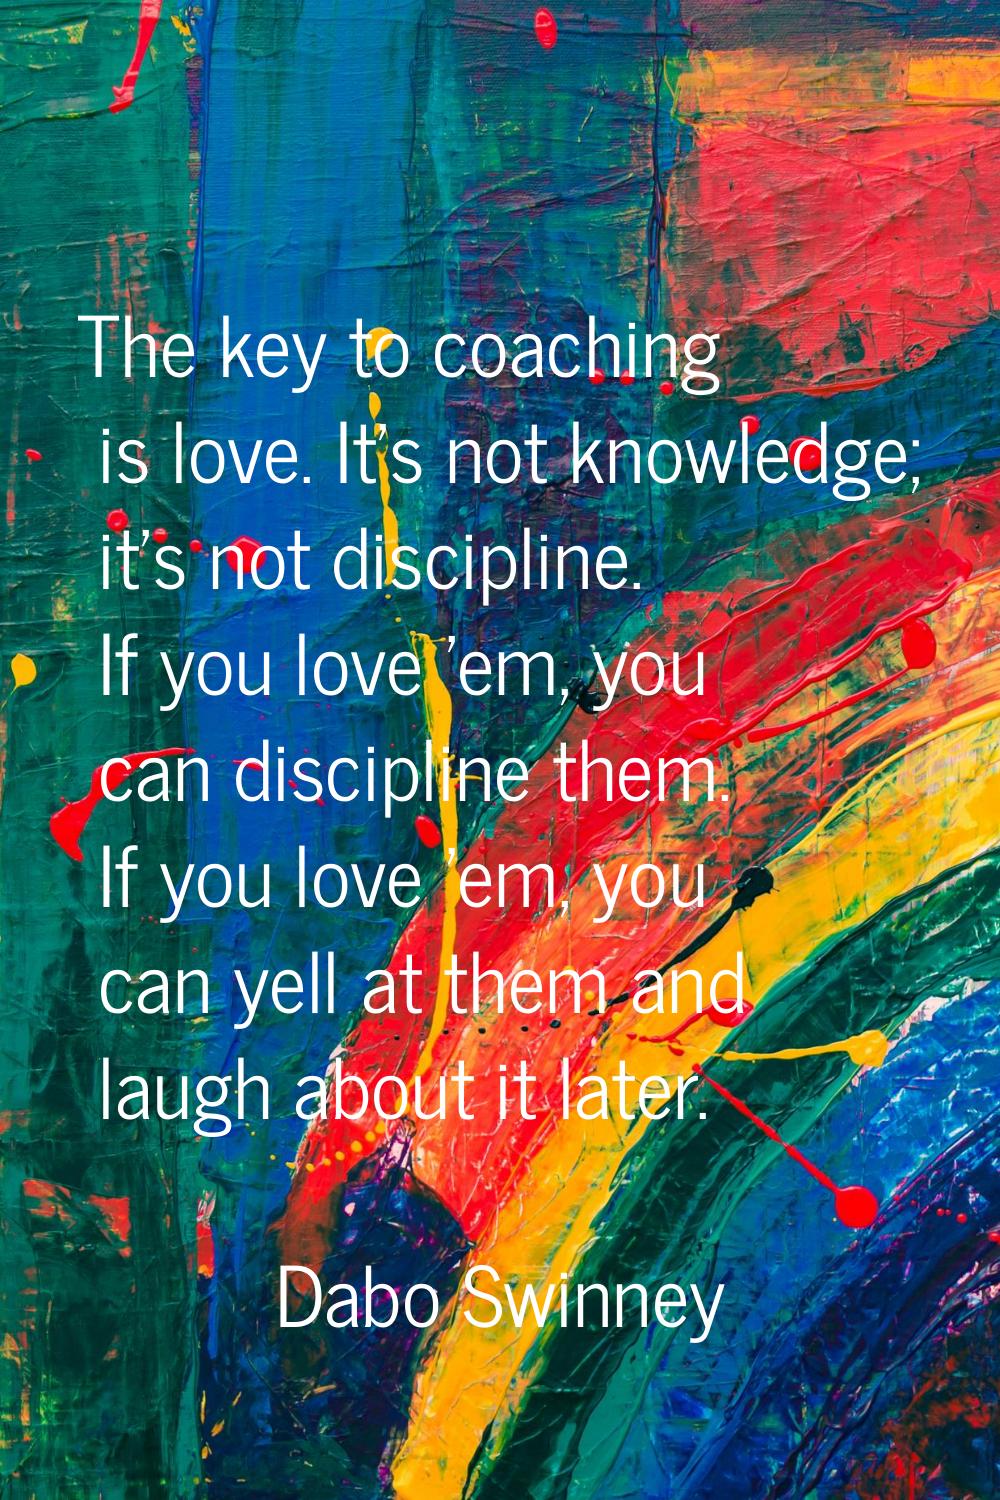 The key to coaching is love. It's not knowledge; it's not discipline. If you love 'em, you can disc